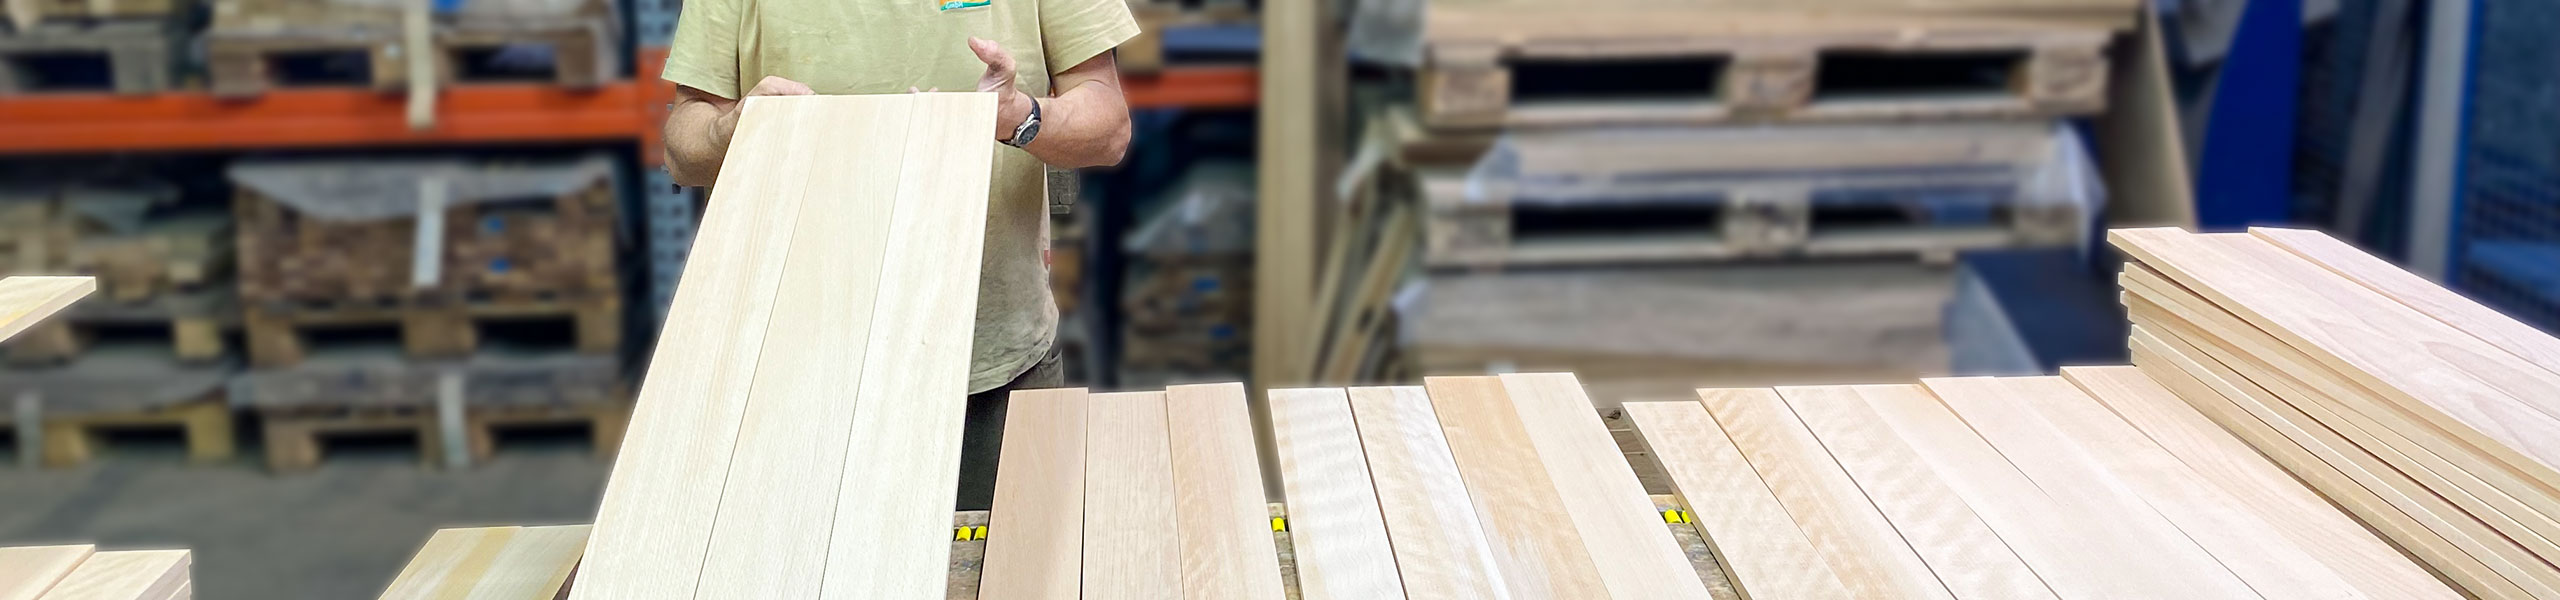 Glued timber & solid wooden boards - Karl Nied GmbH